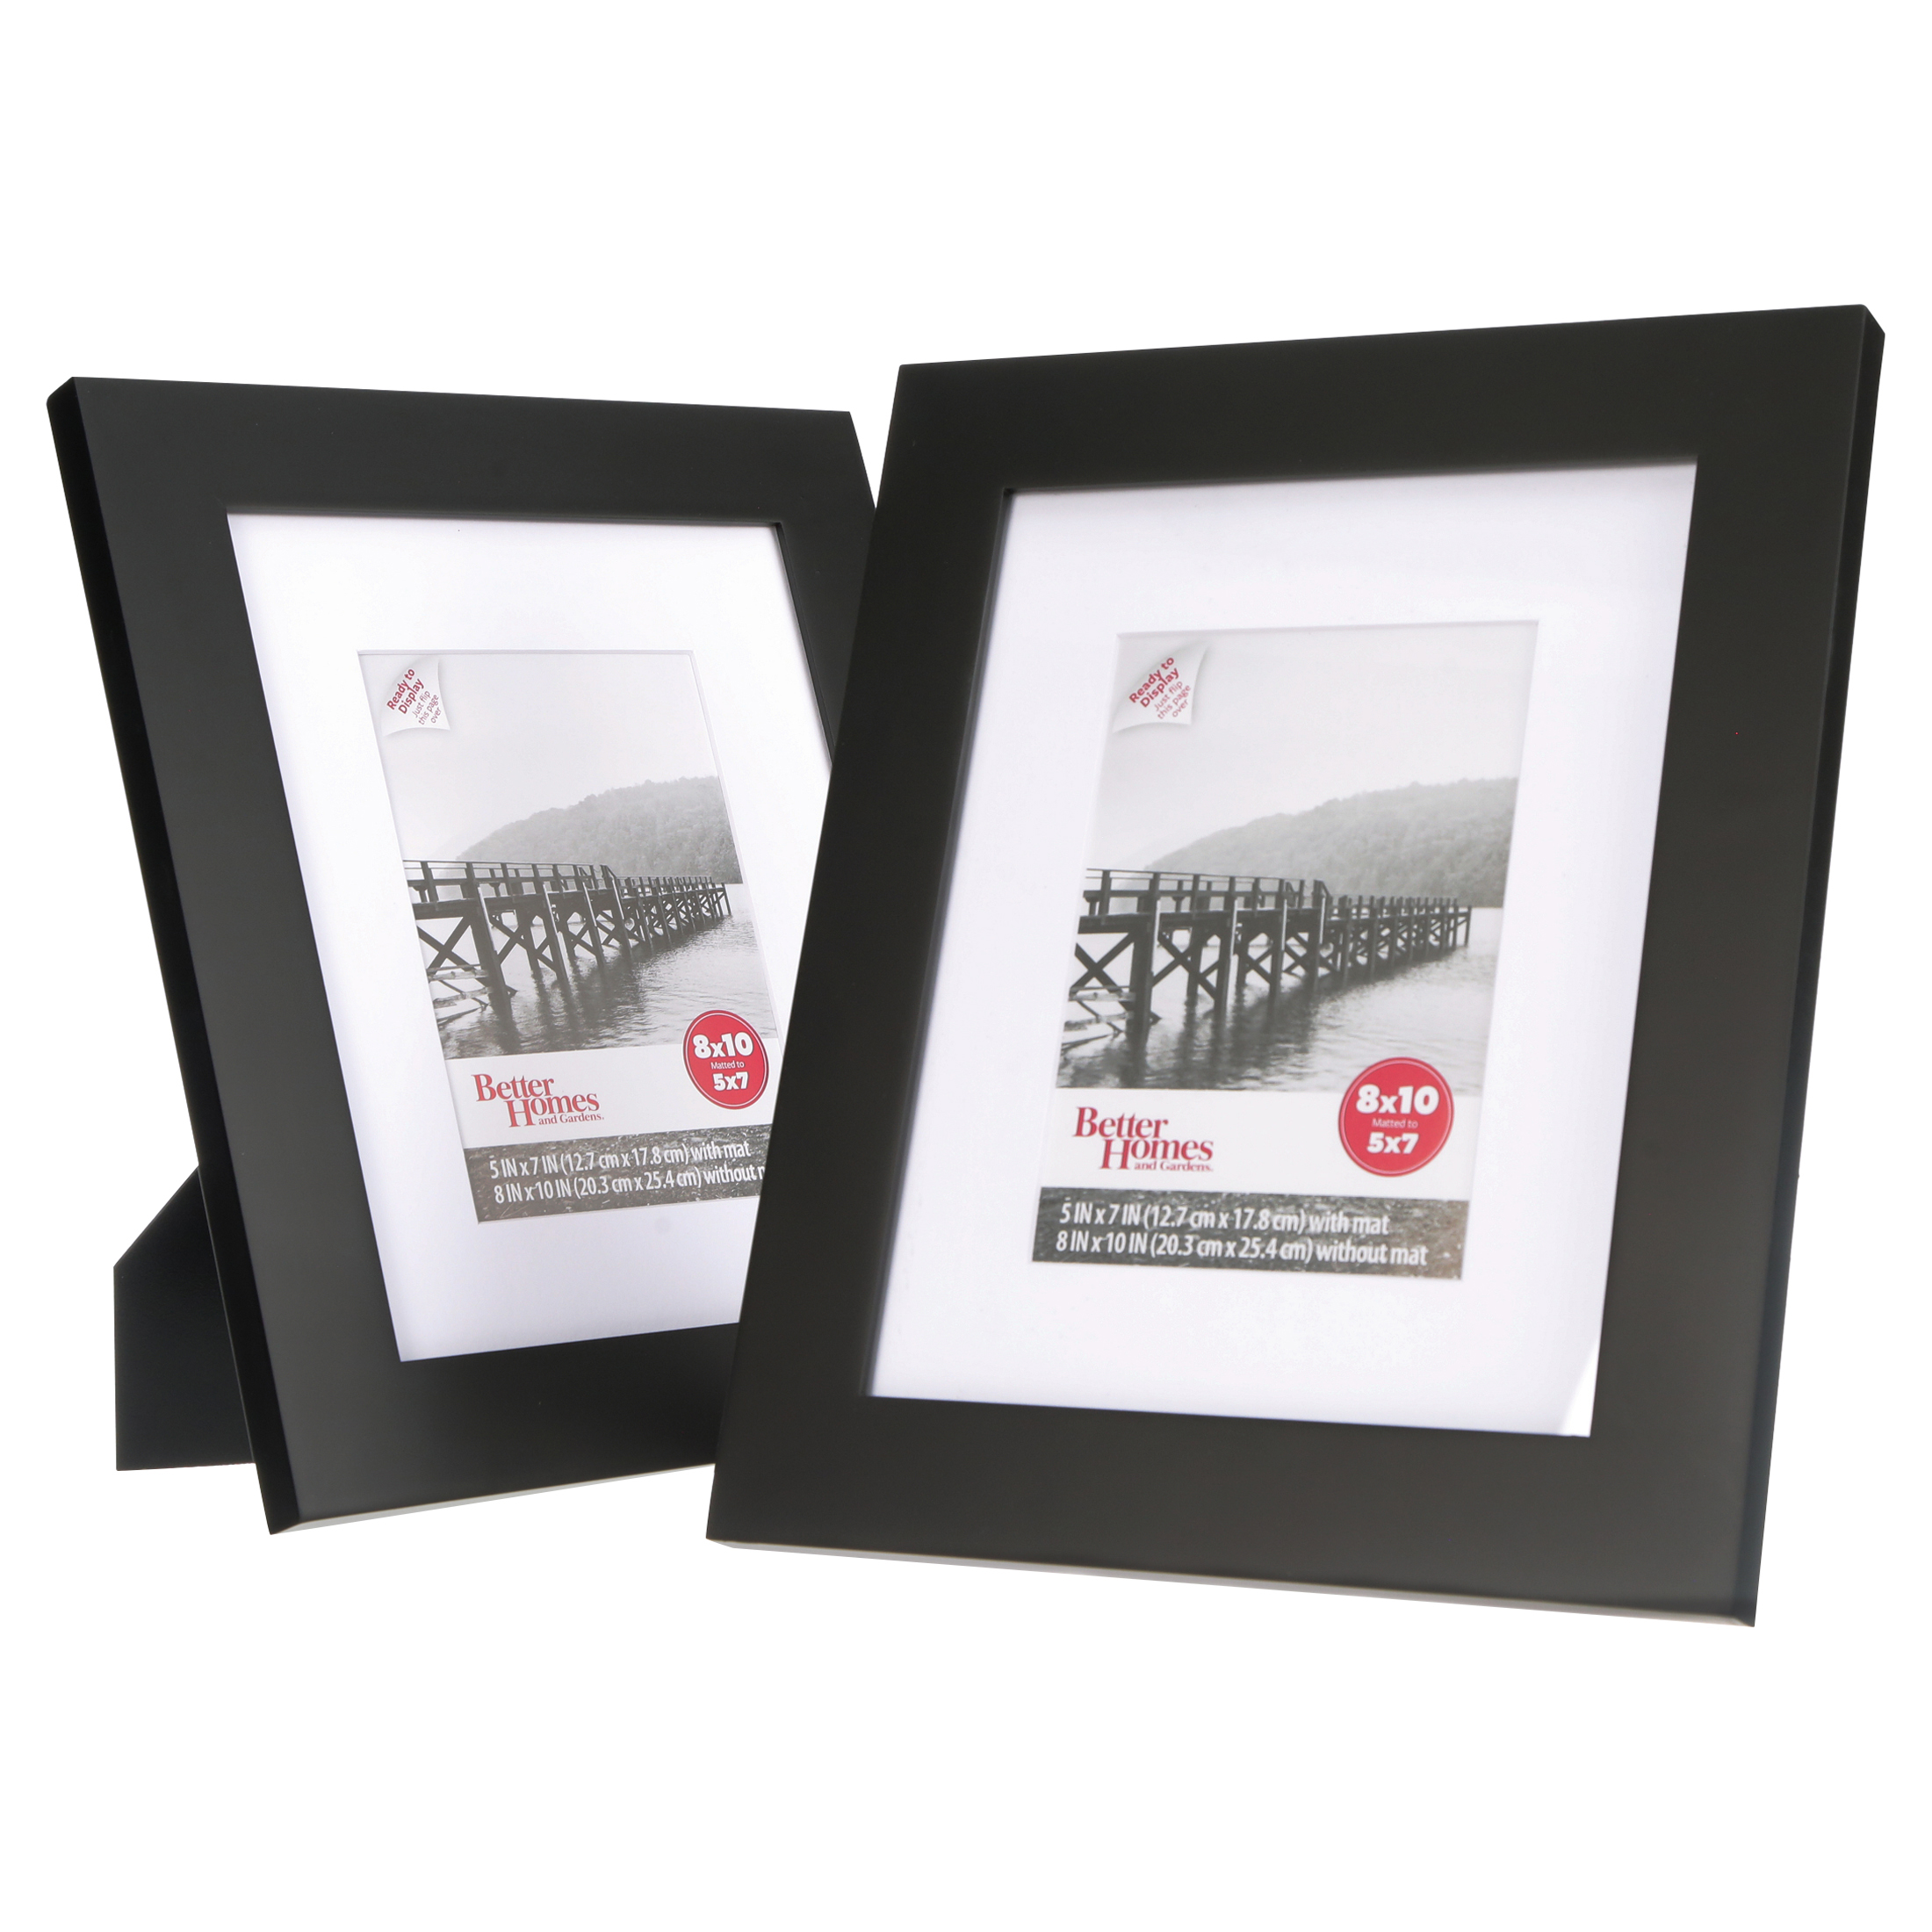 Better Homes & Gardens 8x10 Inch Wide Picture Frame, Black, Set of 2 - image 3 of 7